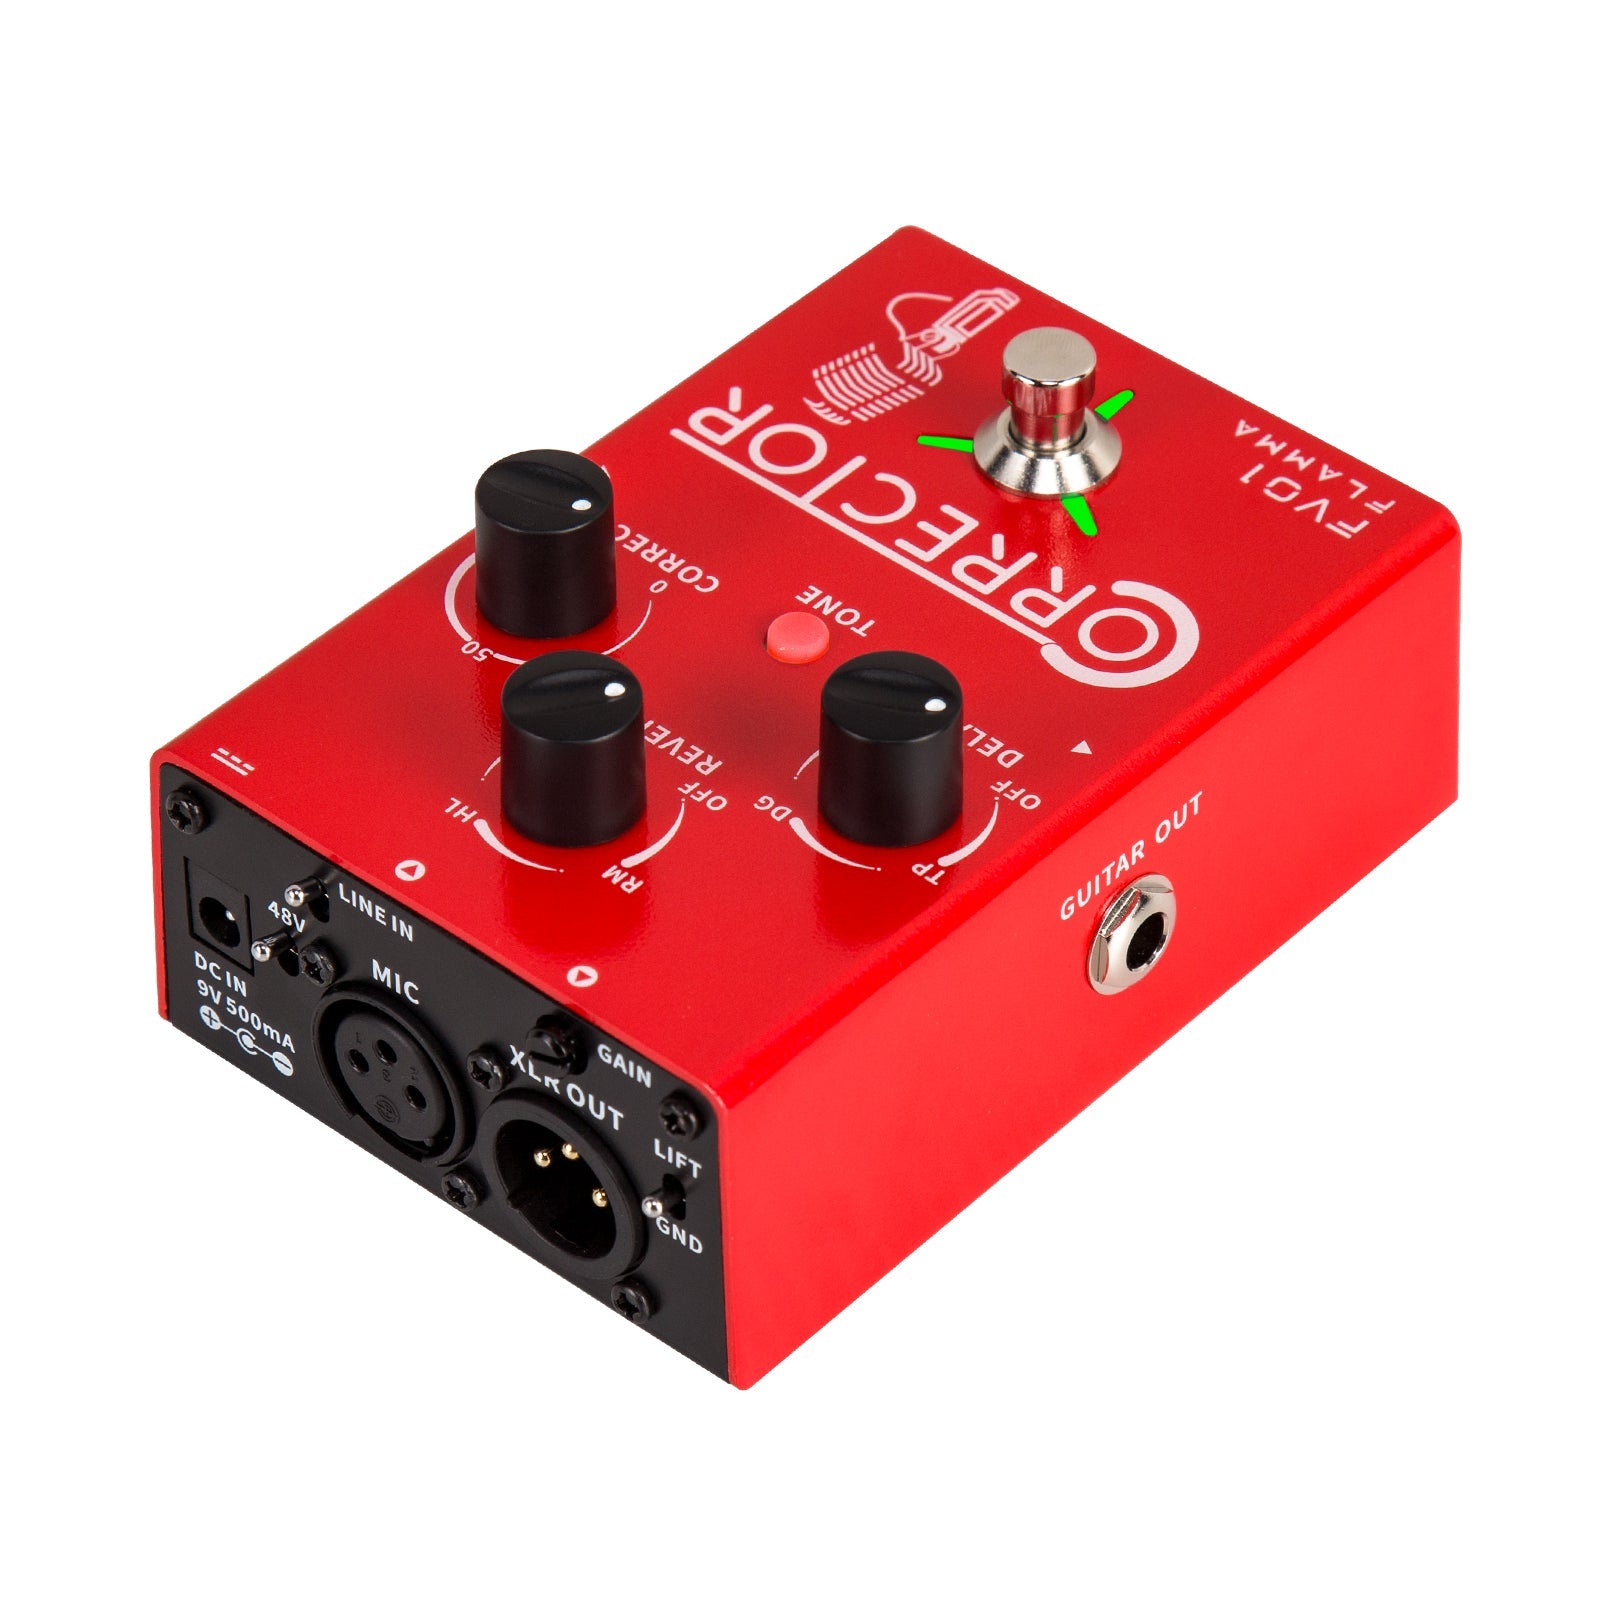 Pedal Flamma Vocal FV01 Vocal Pitch Correction - Việt Music